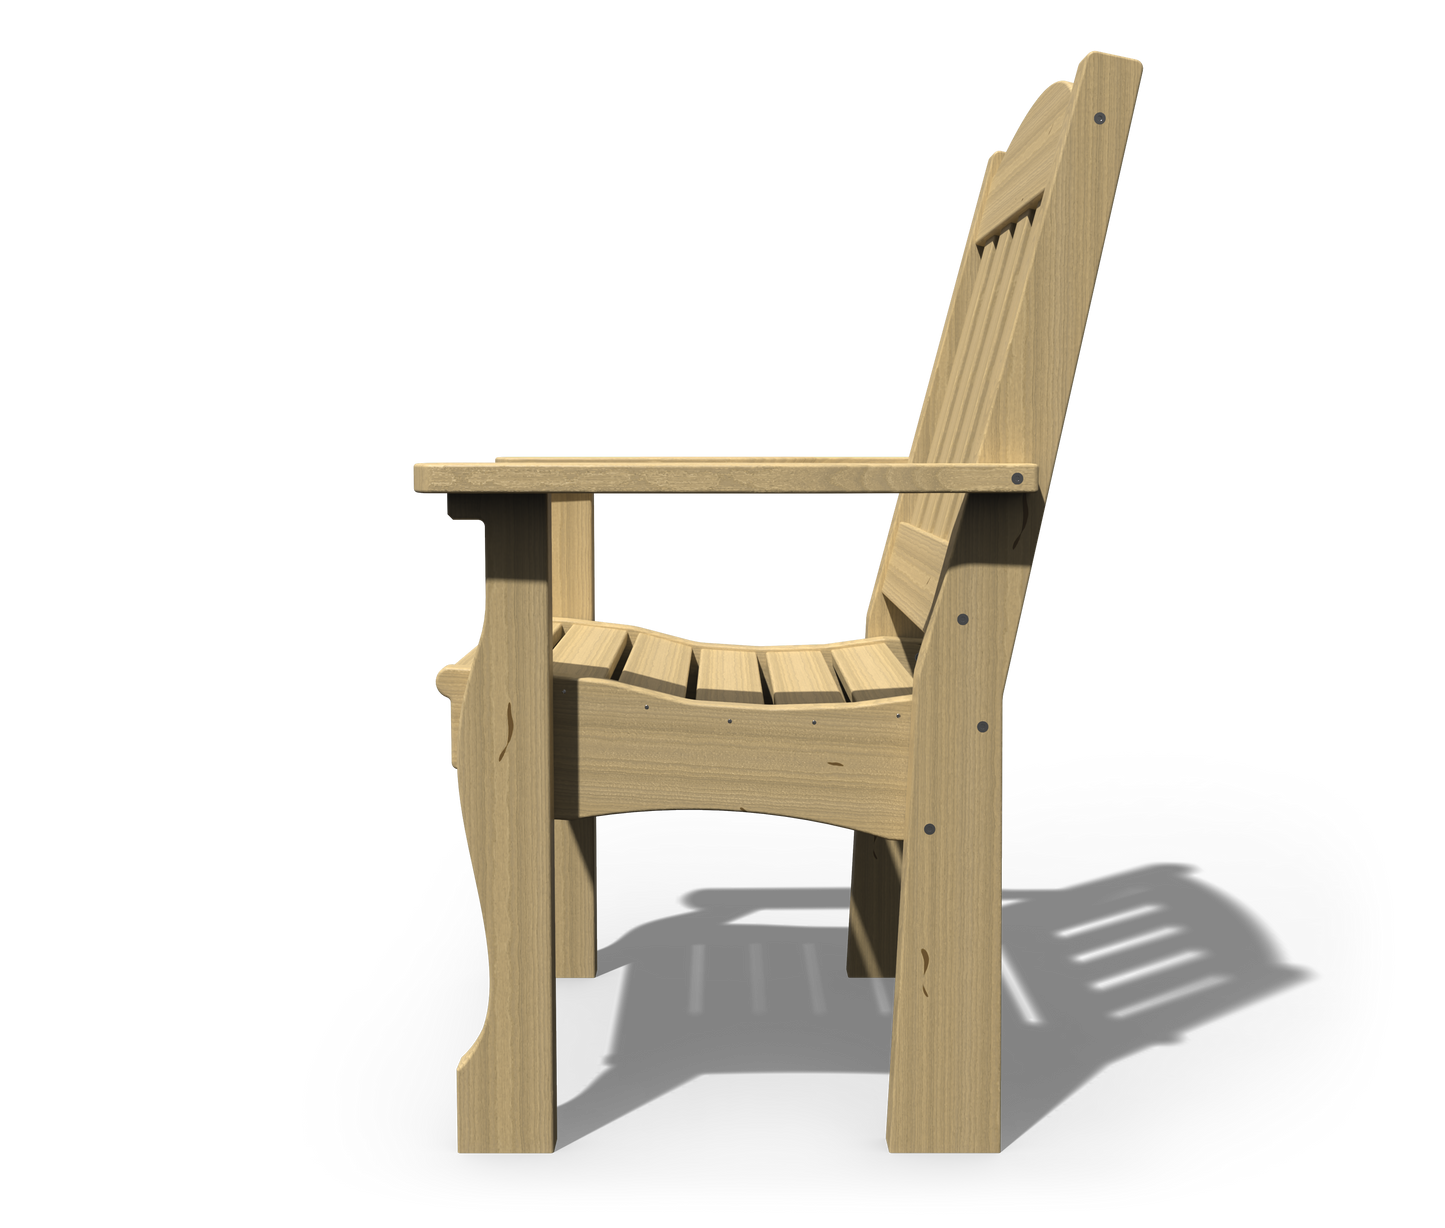 Patiova Pressure Treated Pine English Garden Arm Chair - LEAD TIME TO SHIP 4 WEEKS